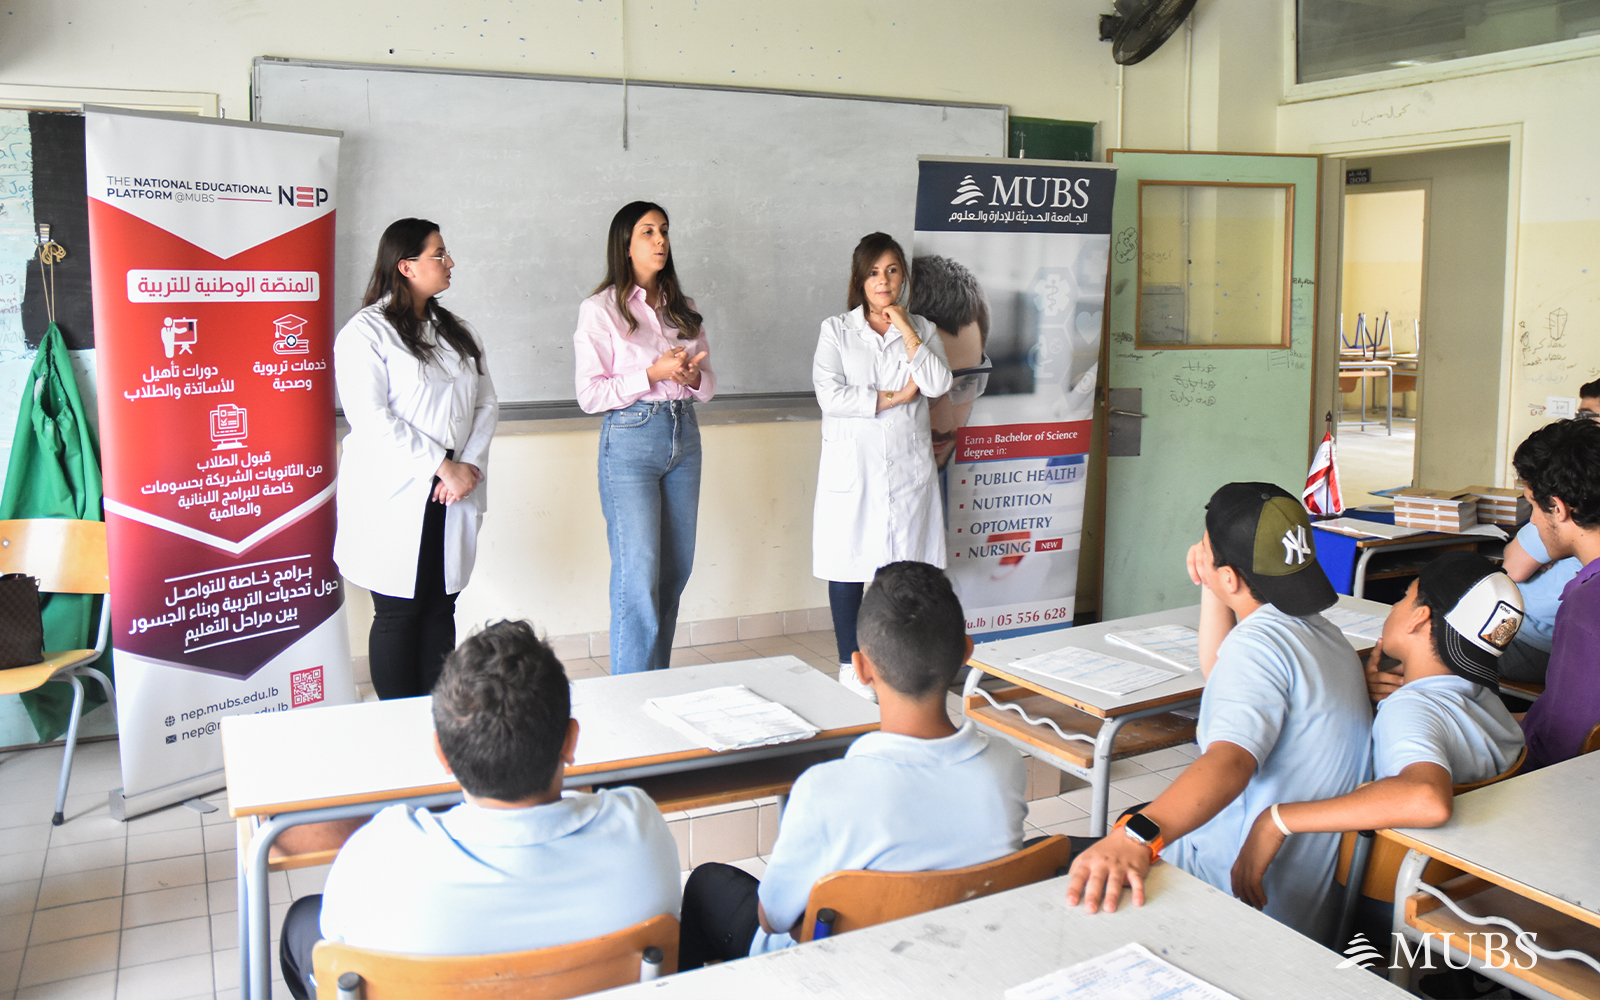 MUBS & NWN Organize a Health Day at Gebran Tueni School to Foster Wellness Through Interactive Stations